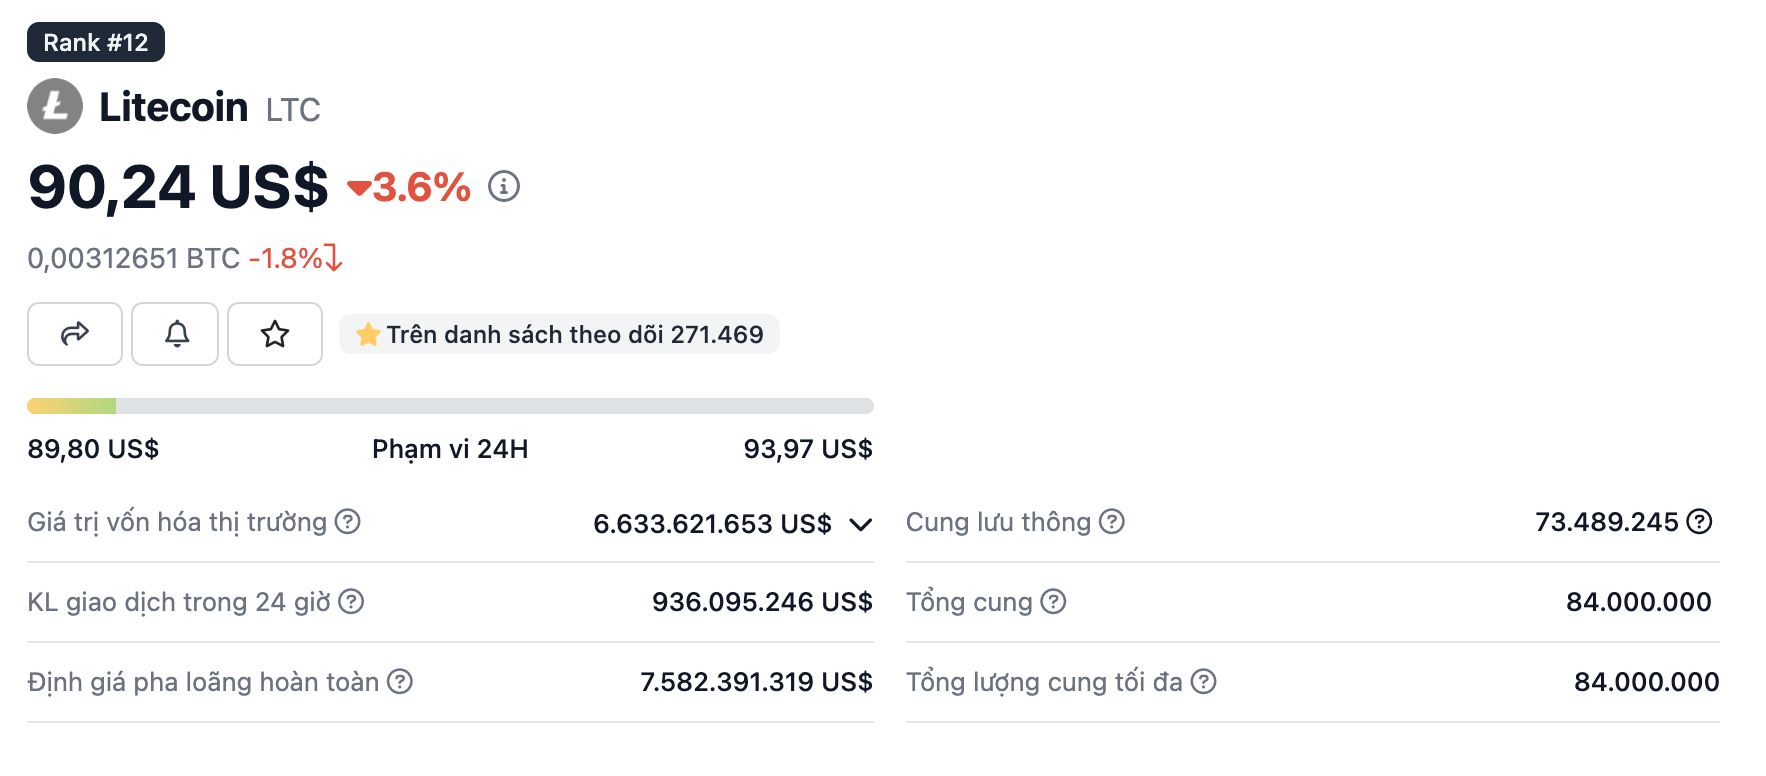 https://file.coin98.com/images/nguon-cung-ltc-Jf7B803Q8wwu0T5T.png